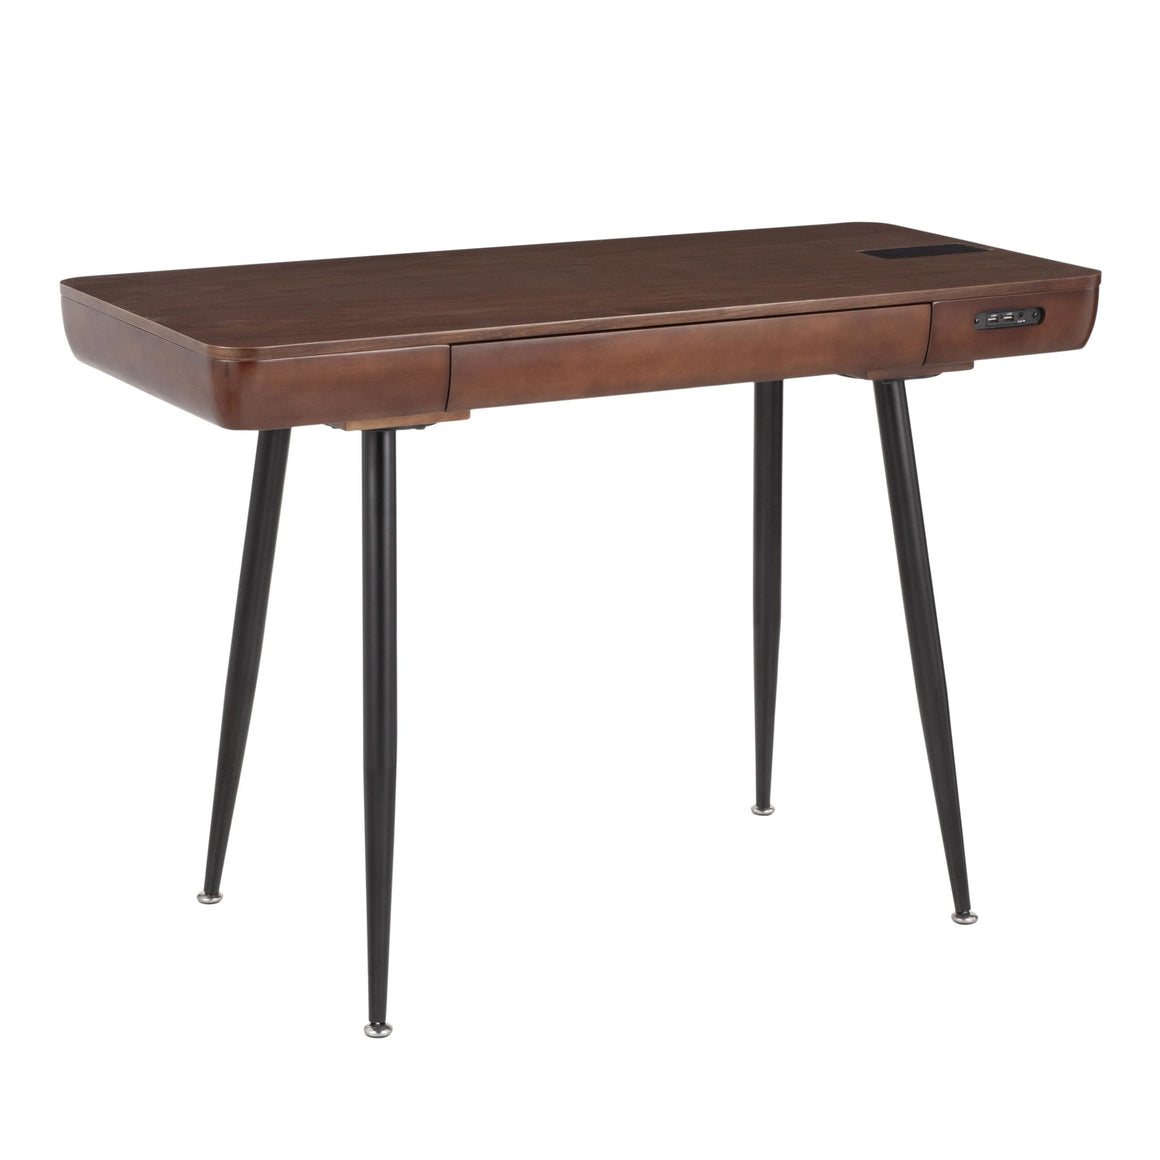 Boom Mid-Century Modern Desk in Black Metal with a Walnut Wood Top by LumiSource